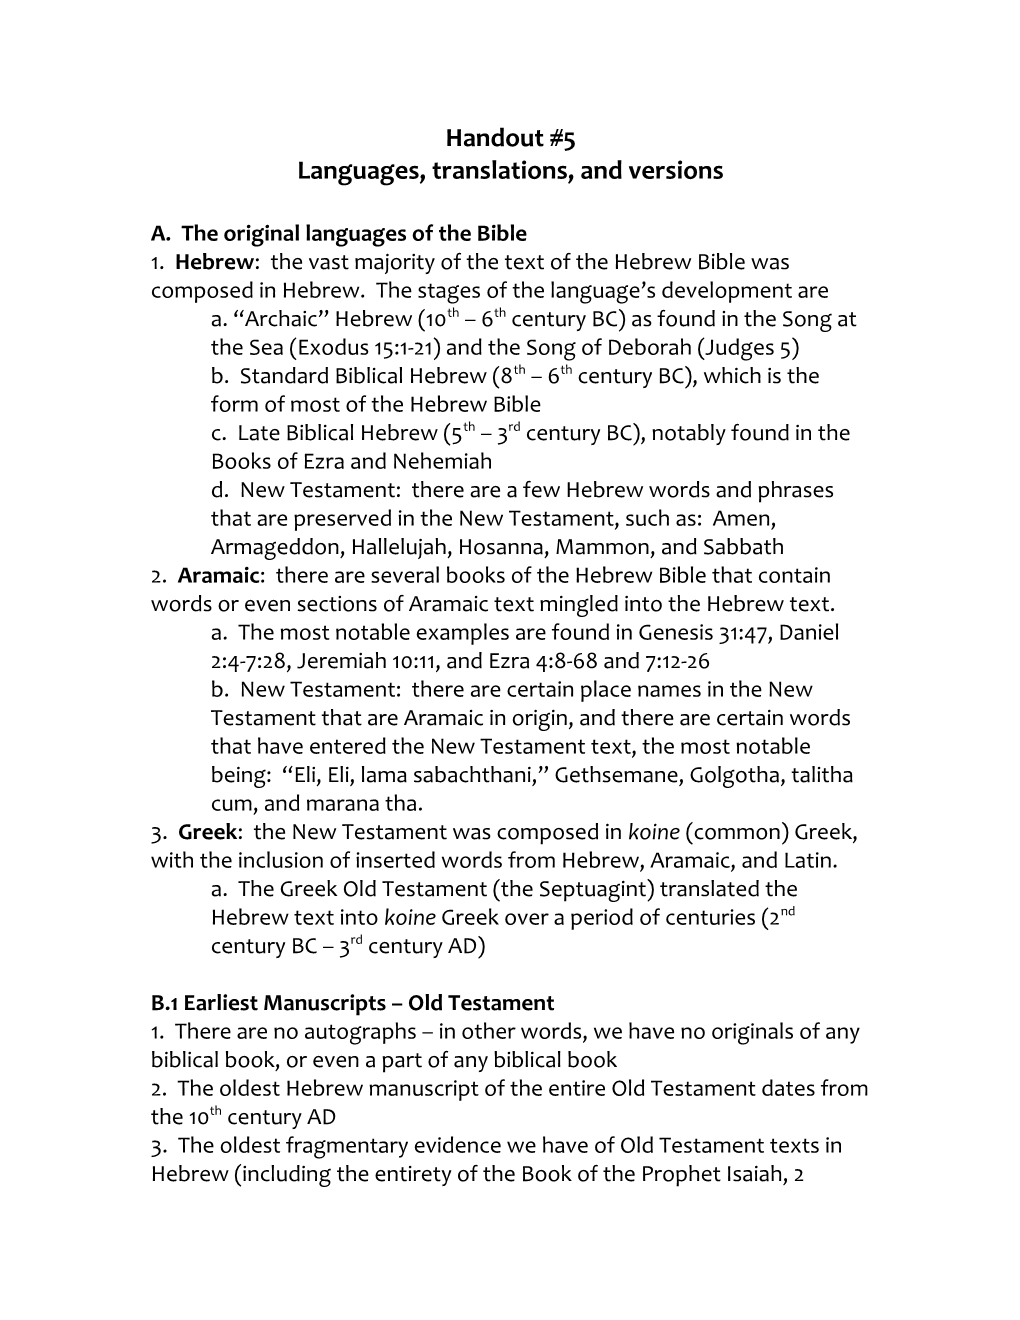 Languages, Translations, and Versions